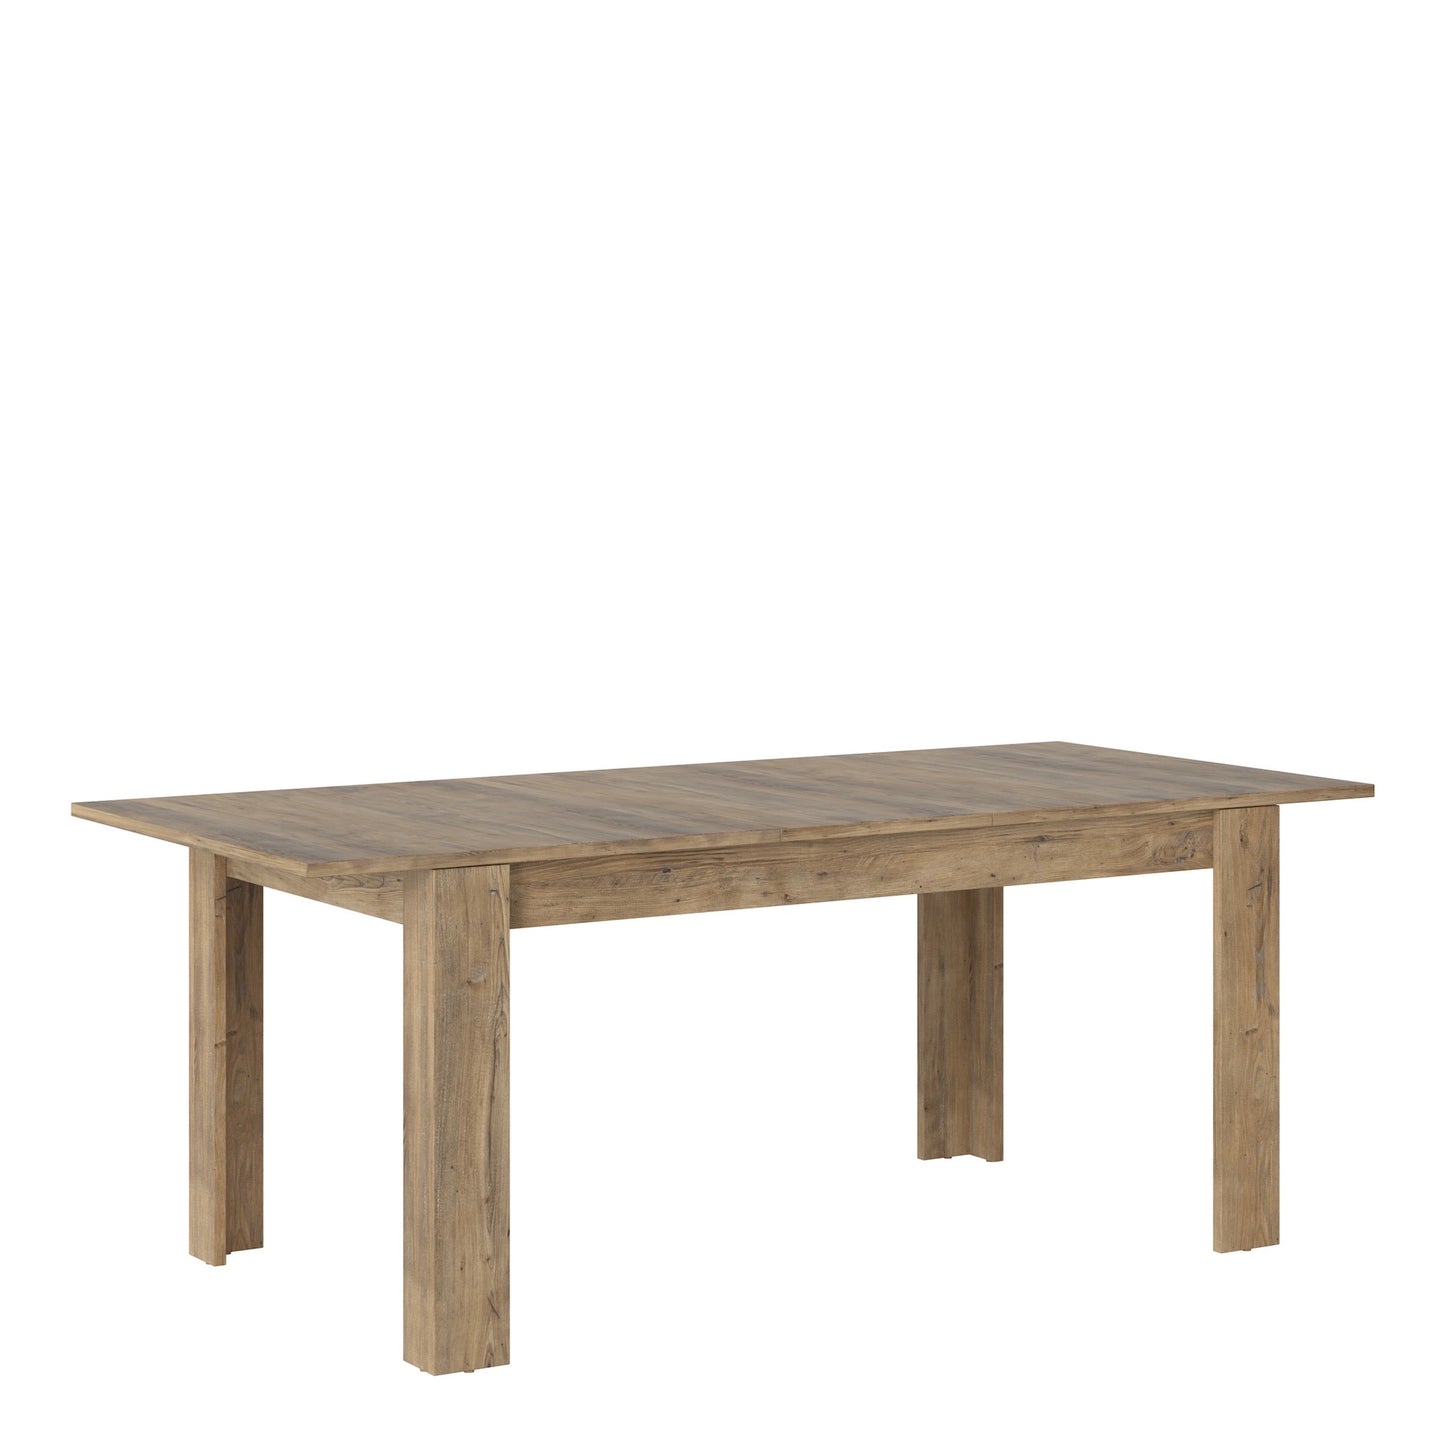 Furniture To Go Rapallo Extending Dining Table 160-200cm in Chestnut & Matera Grey